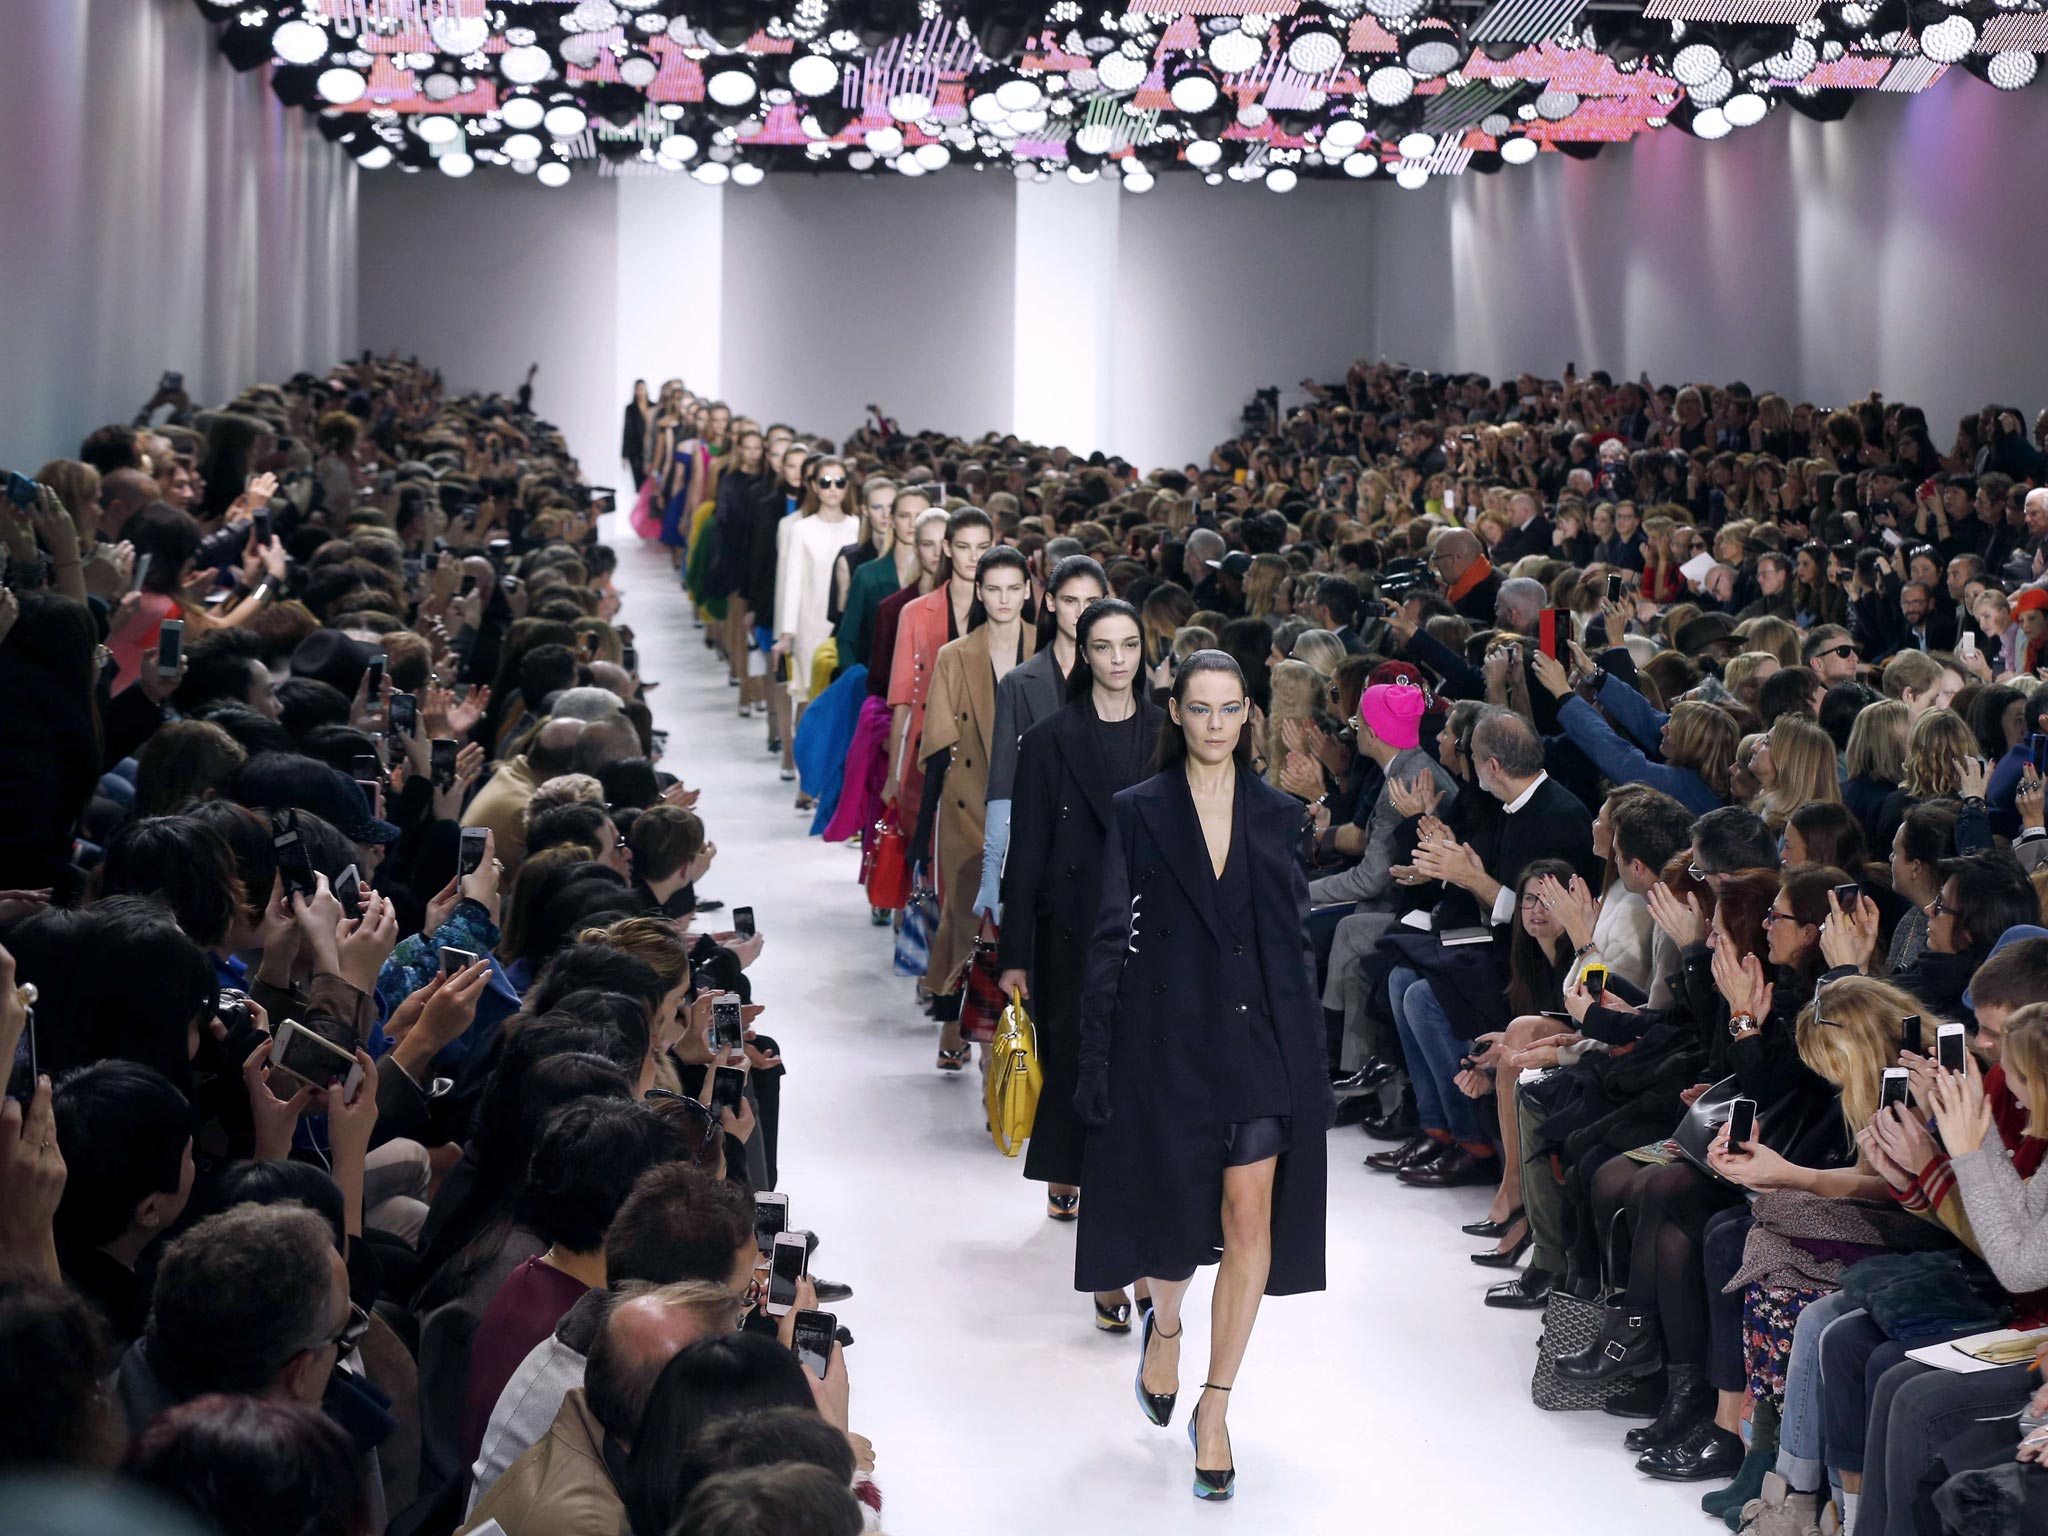 The suit dominated Christian Dior’s autumn/winter ready-to-wear show in Paris